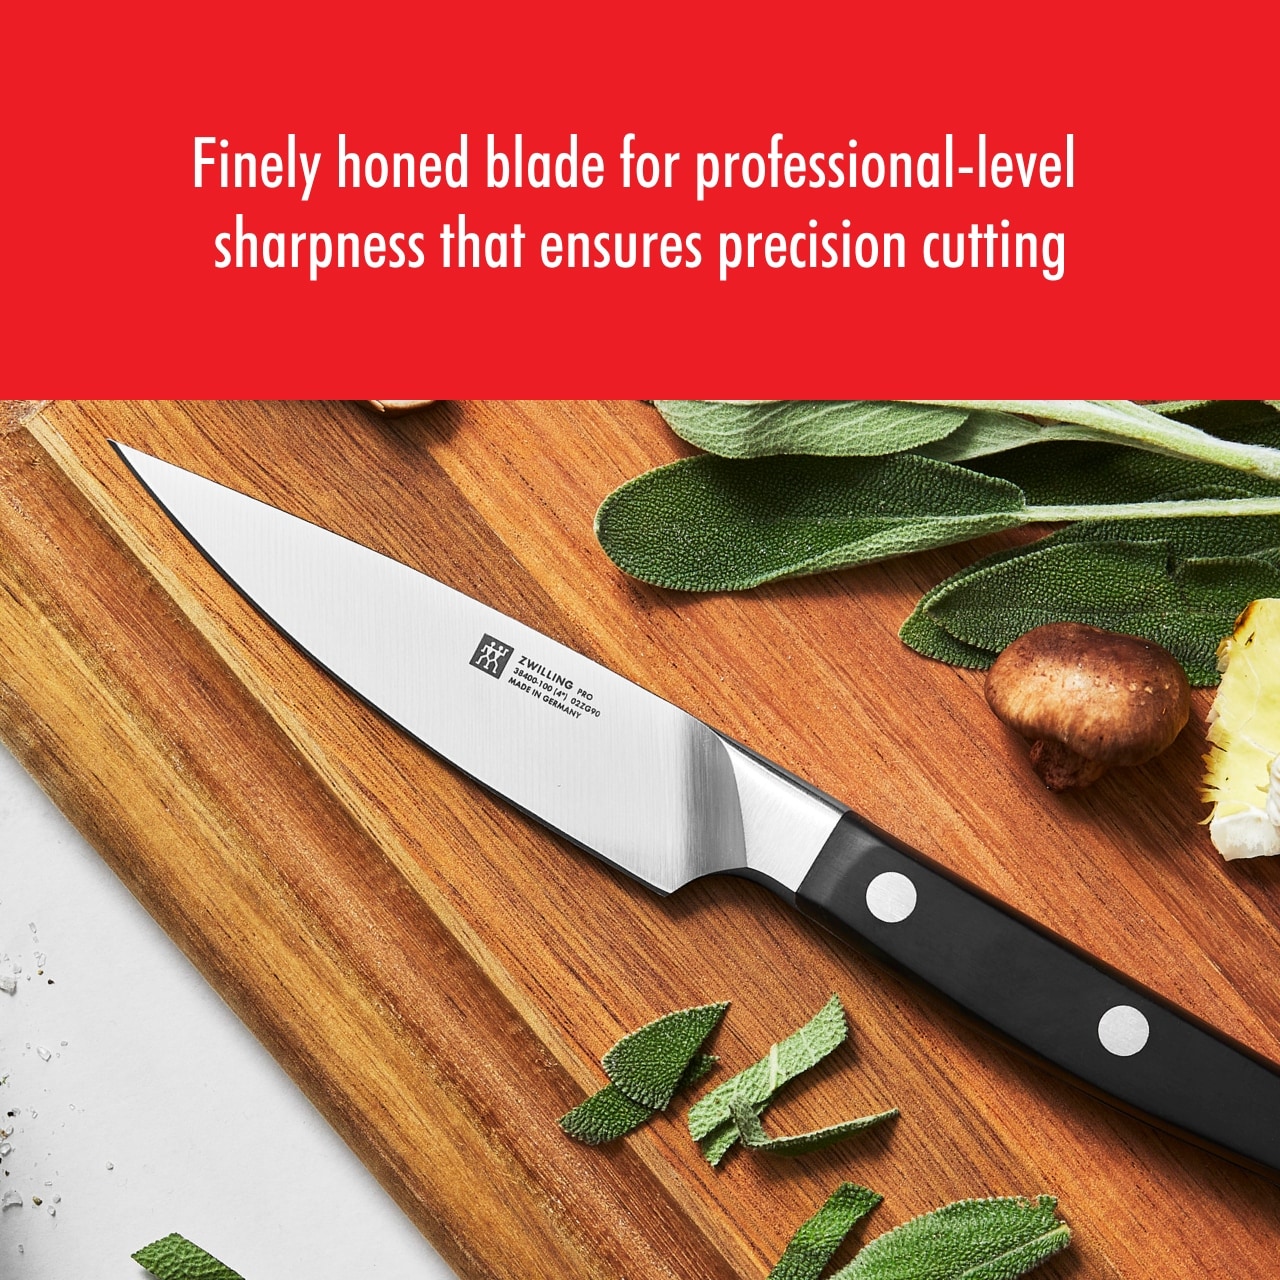 ZWILLING Pro 10-pc Knife Set With 17.5-inch Stainless Magnetic Knife Bar 